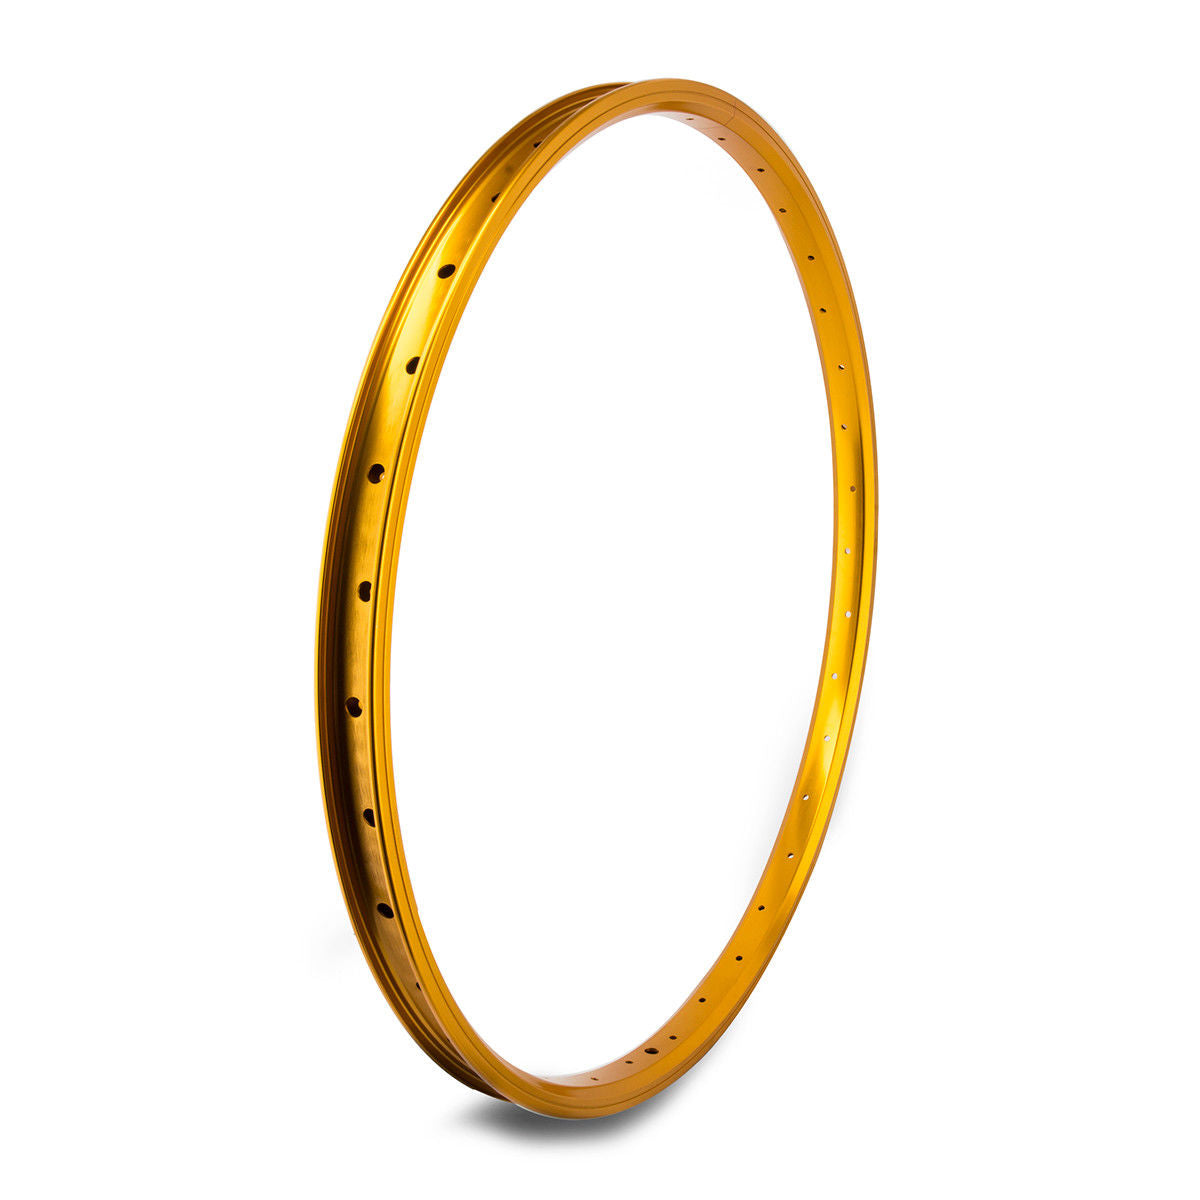 26" SE Racing J24SG Double Wall Rim - 36H - Gold Anodized